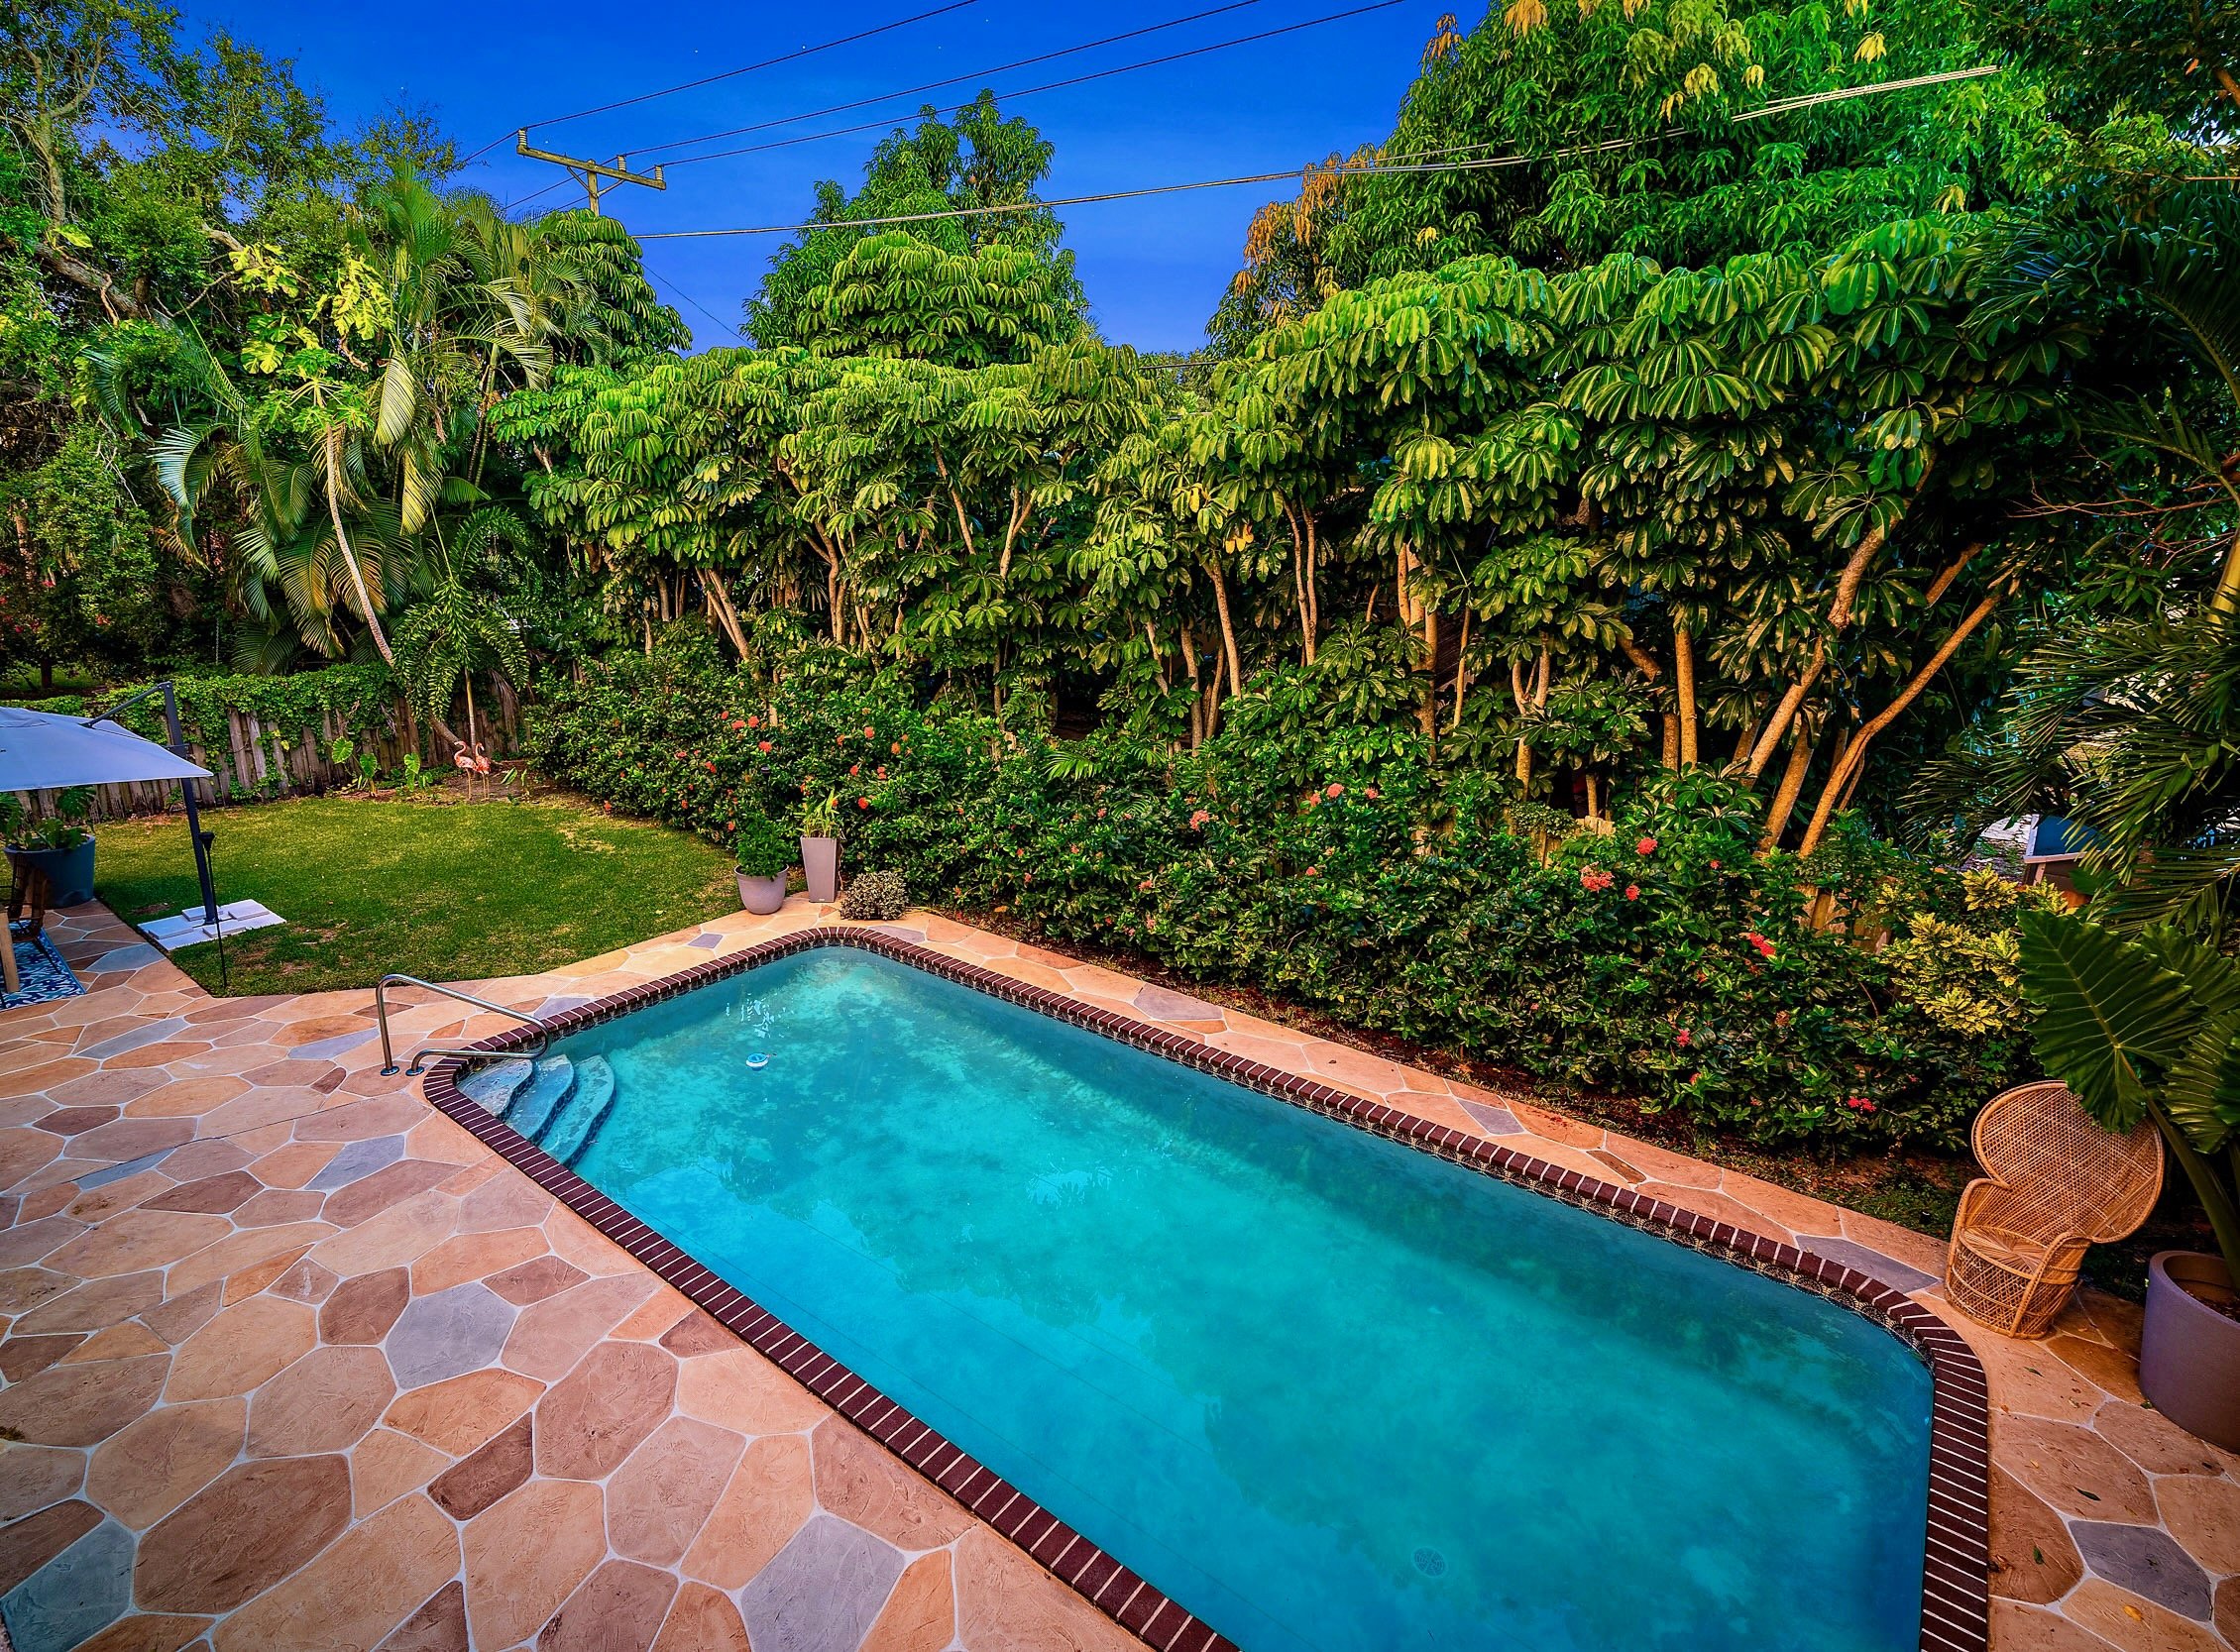  stunning and expansive home for sale in boca raton florida by the mneyer lucas team. the best real estate team in palm beach county lists this 5 bedroom 3.5 bathroom home with three large living areas, two dining room option, large sparkling blue po